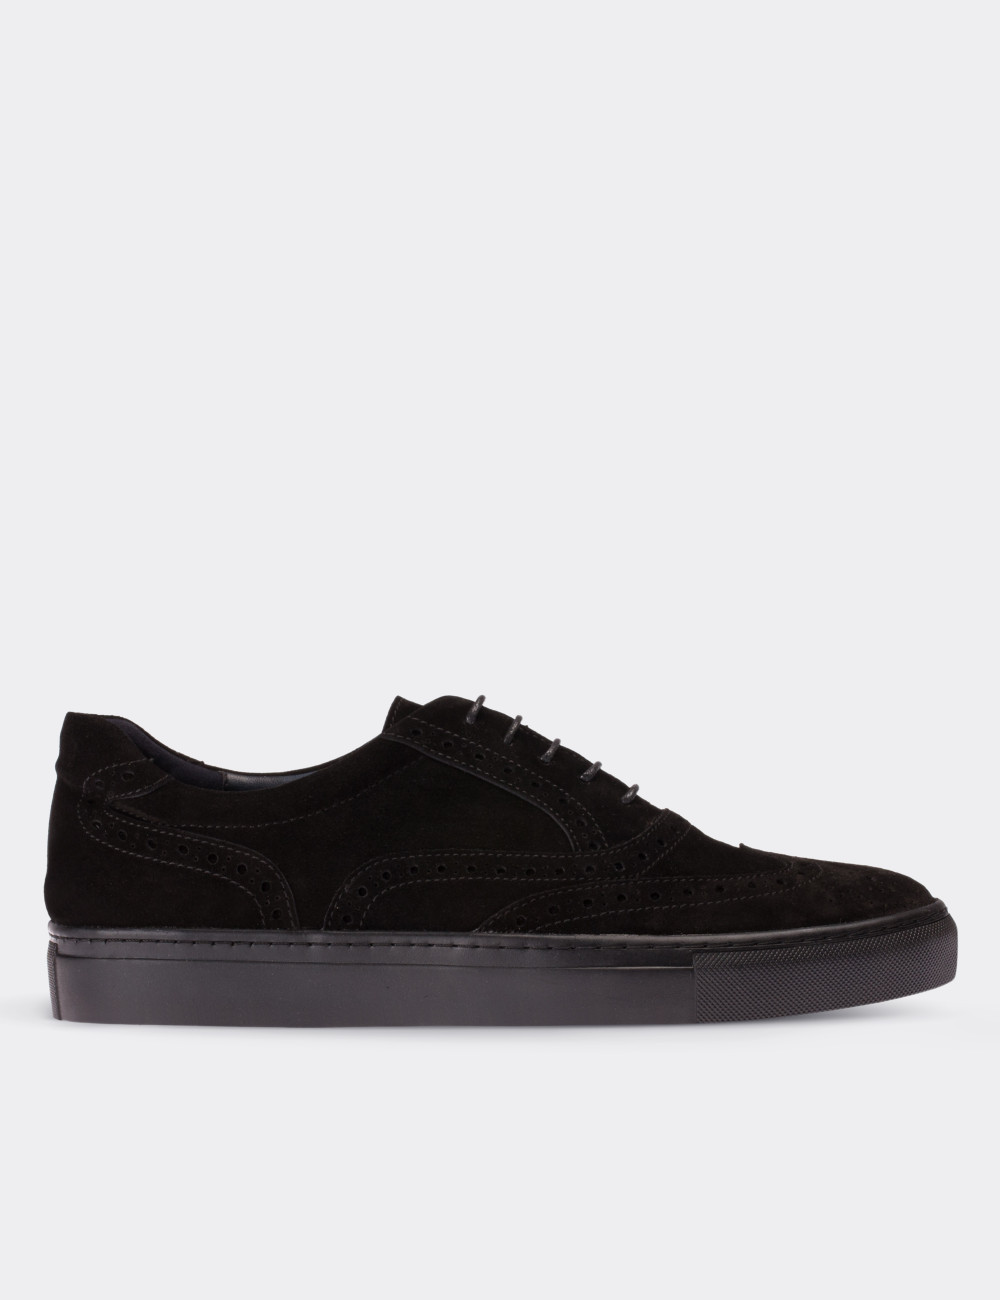 Black Suede Leather Sneakers - 01637MSYHC03